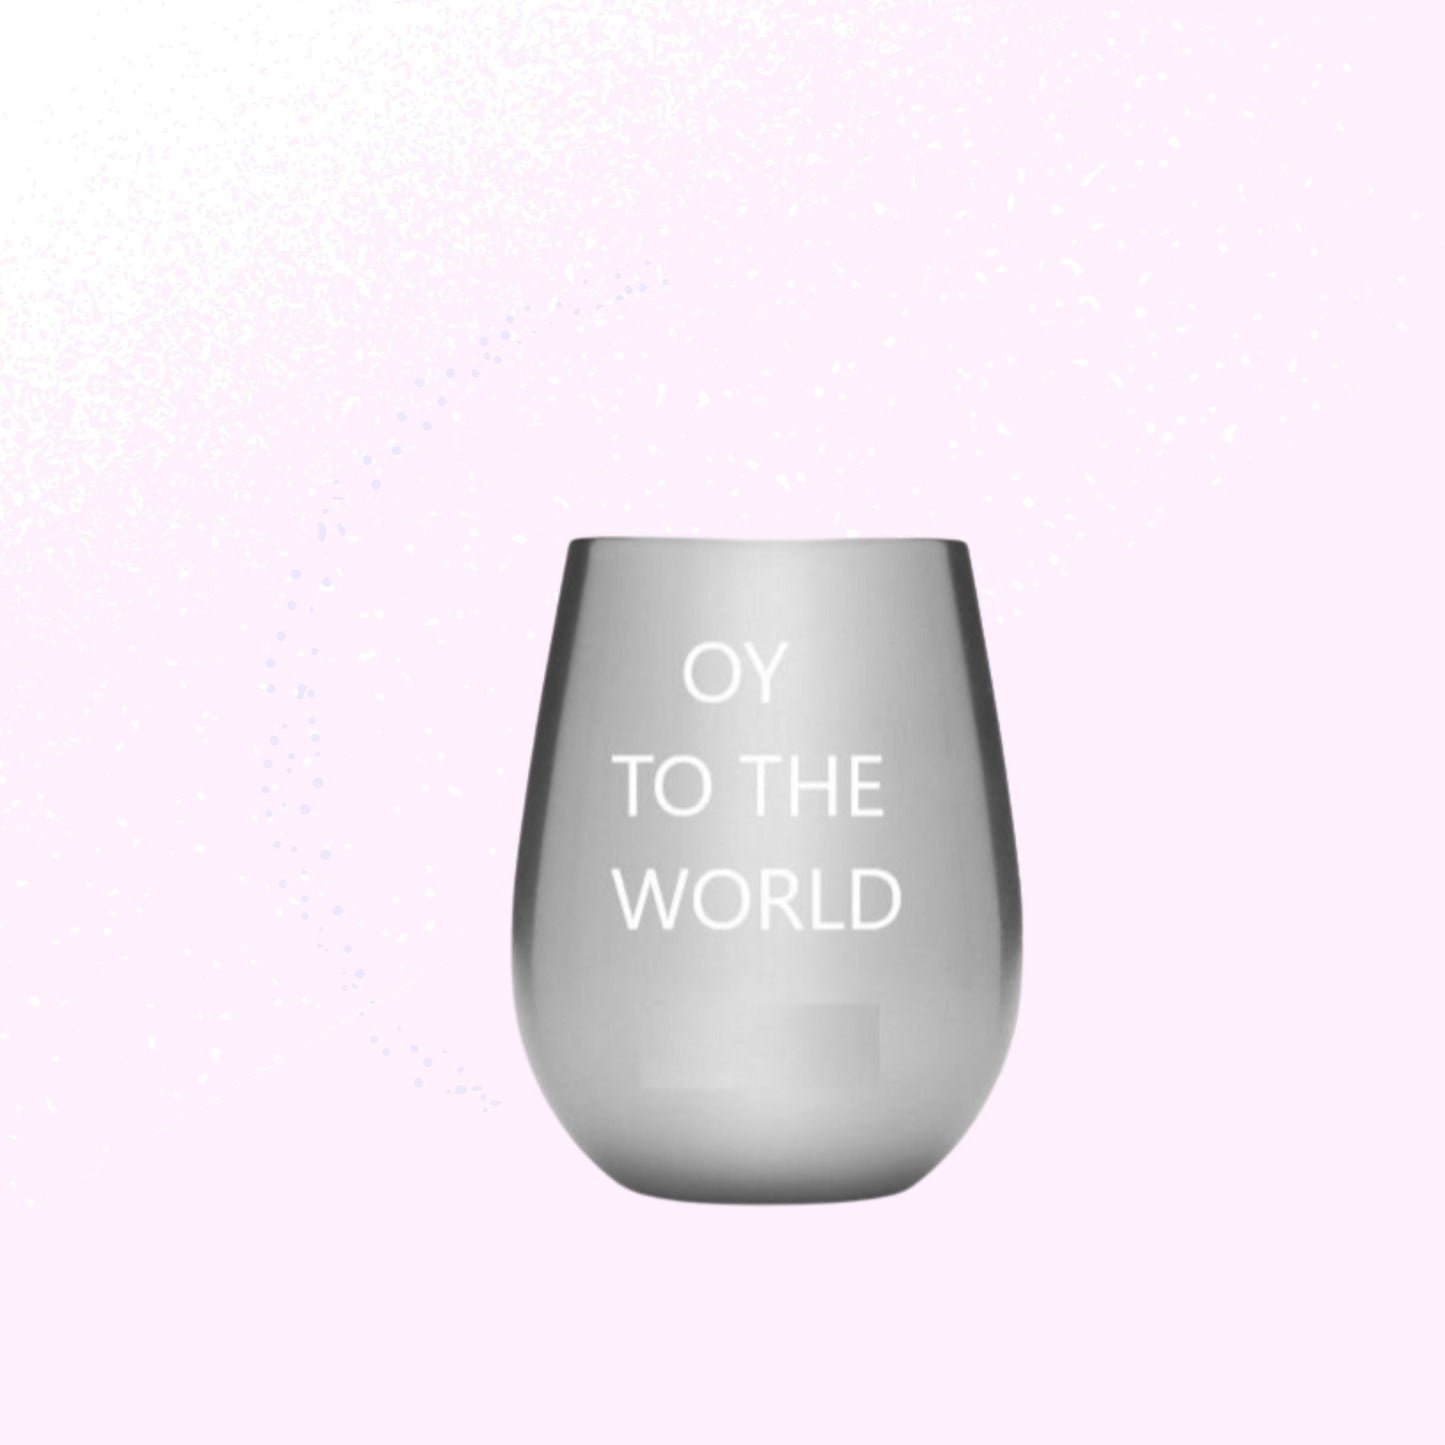 Oy vey! Oy To The World Stemless Wine Glass | Snarky Hanukkah or Non-Christmas Glass